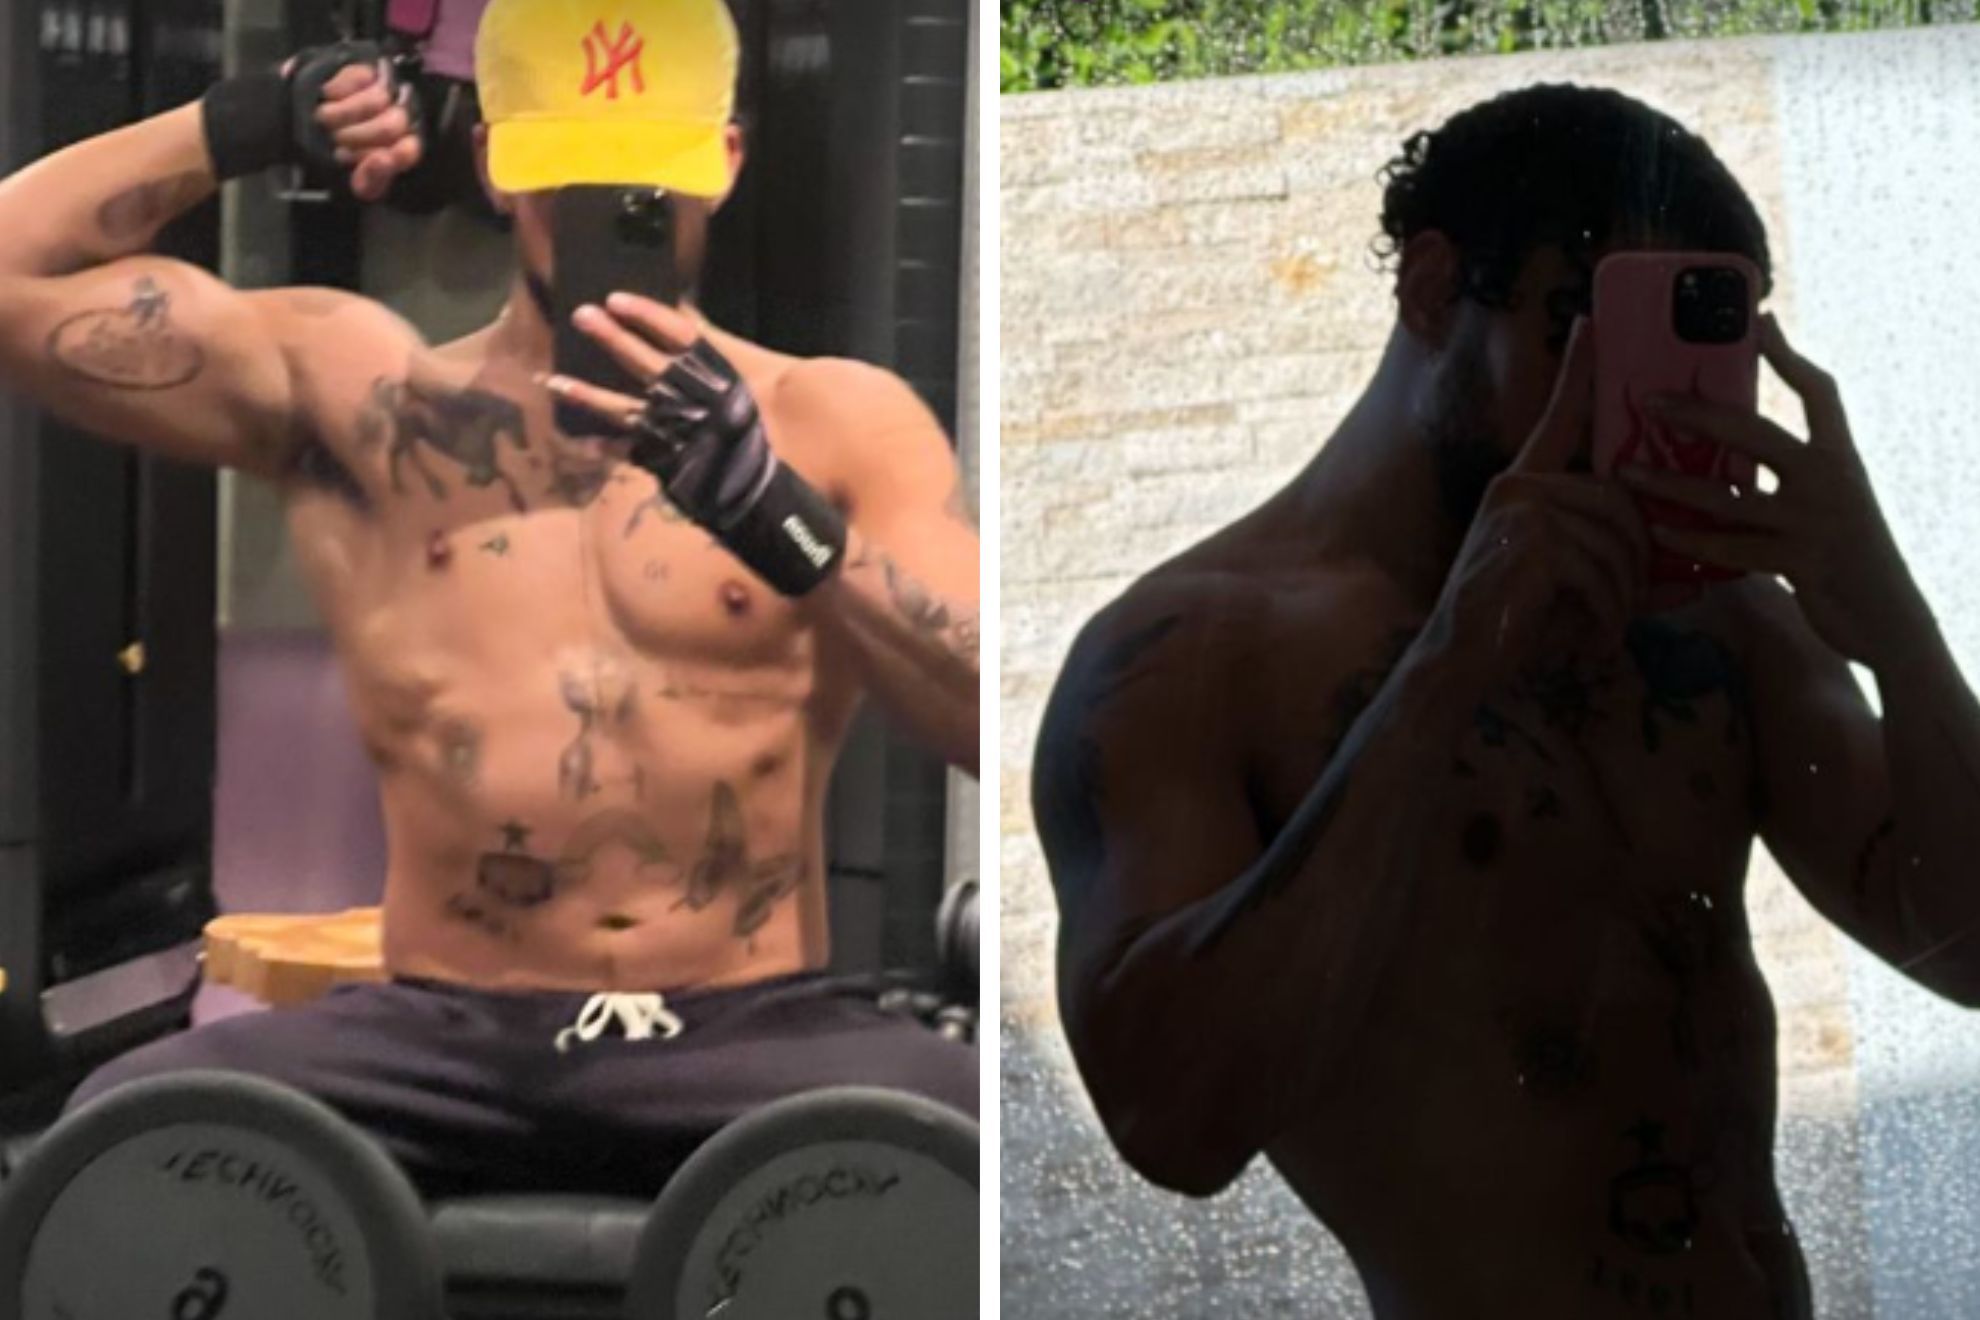 Bad Bunny before and after: Benito shows off body transformation